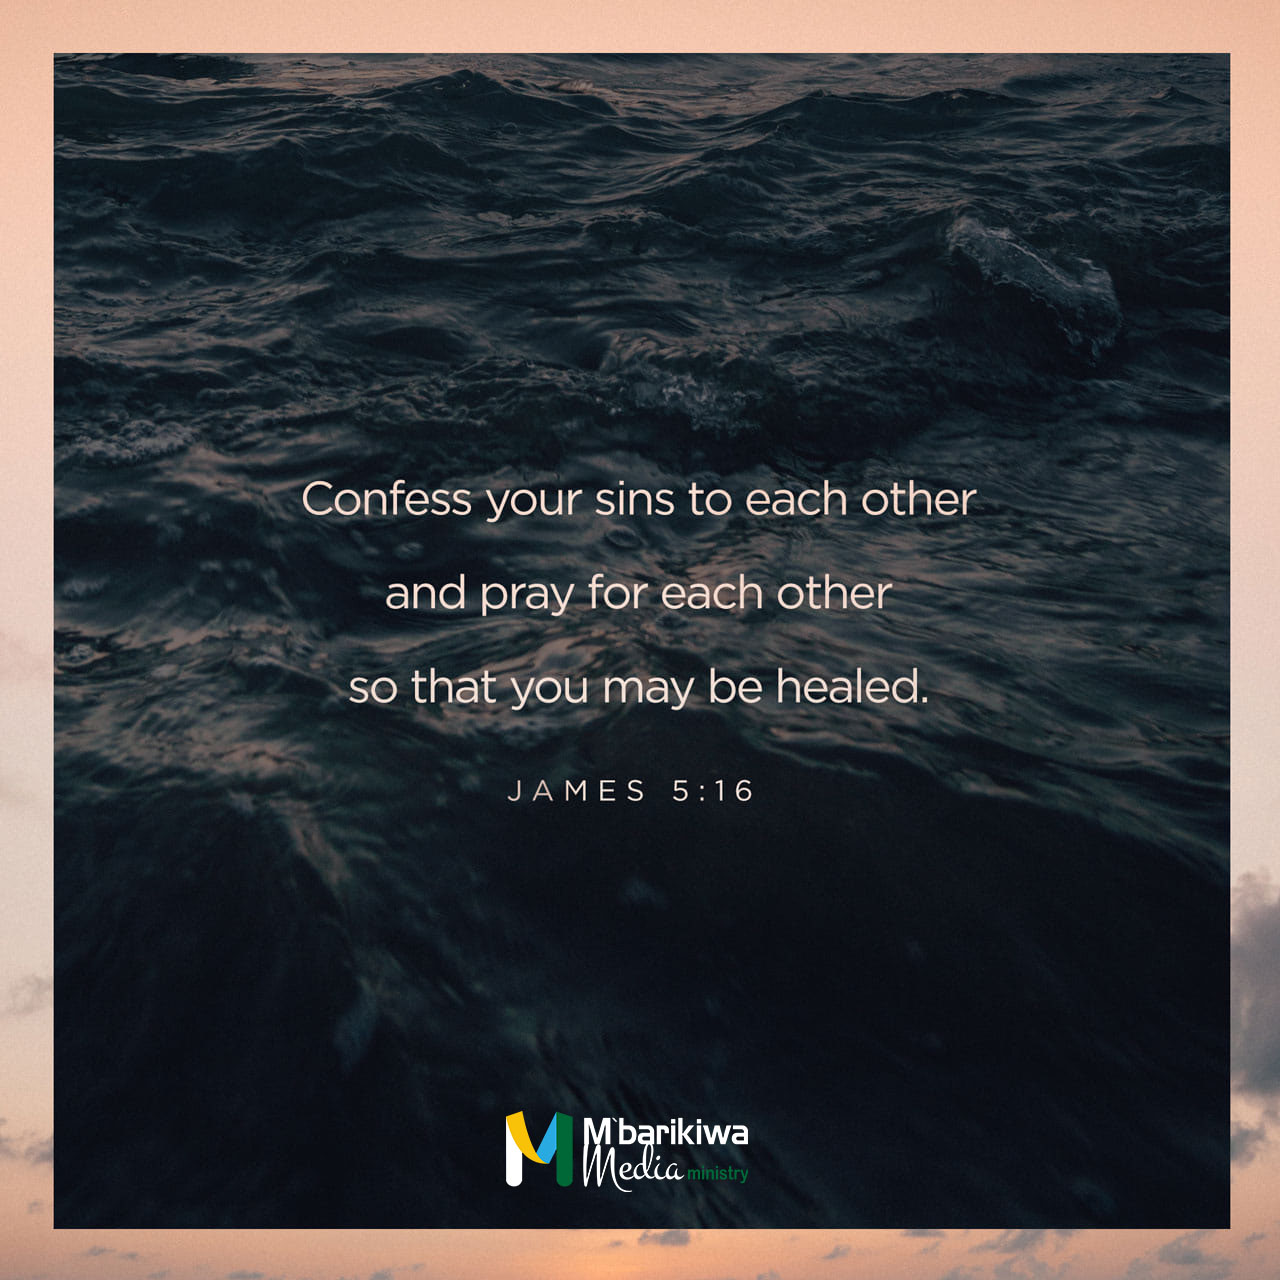 Confess your faults one to another, and pray one for another, that ye may be healed. The effectual fervent prayer of a righteous man availeth much. James 5:16 KJV